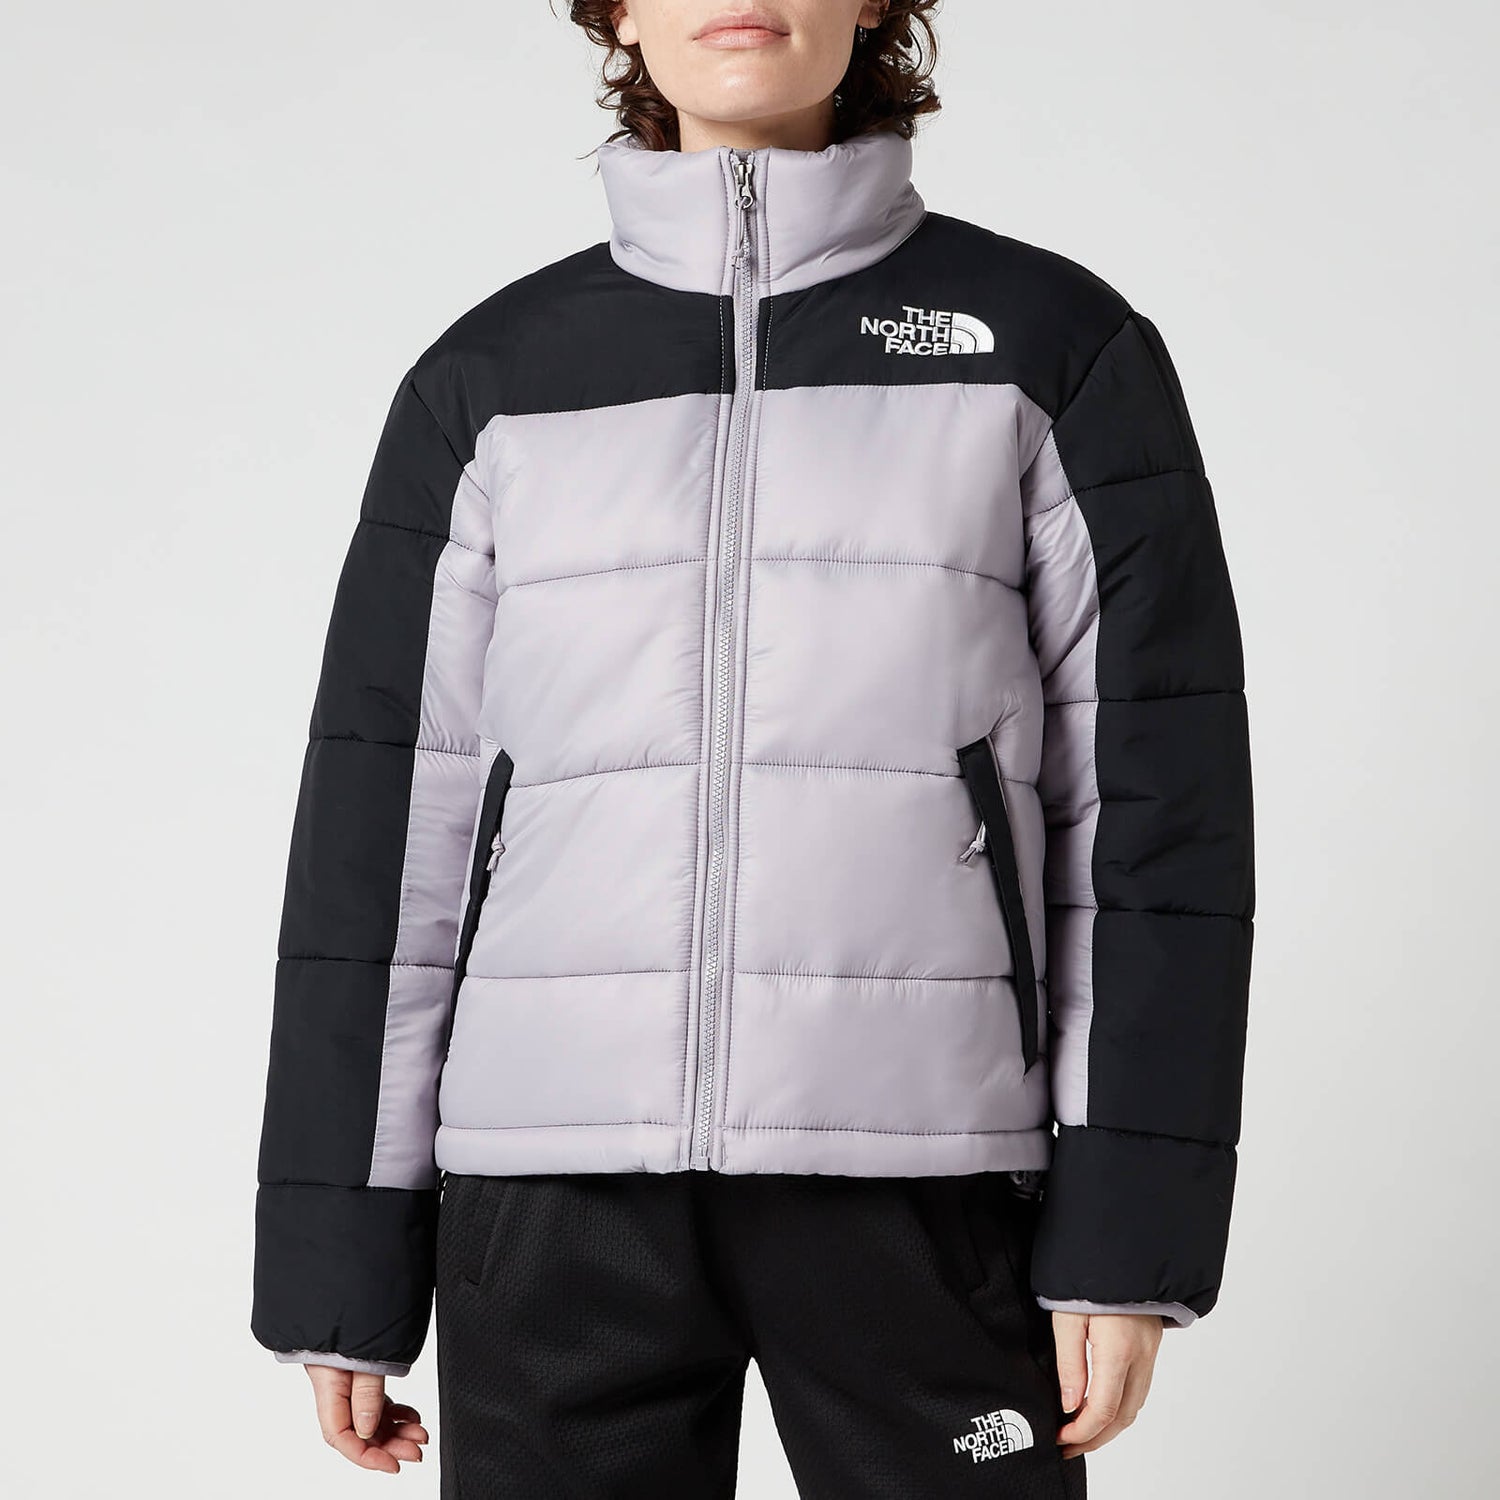 The North Face Women's Himalayan Insulated Jacket - Light Purple